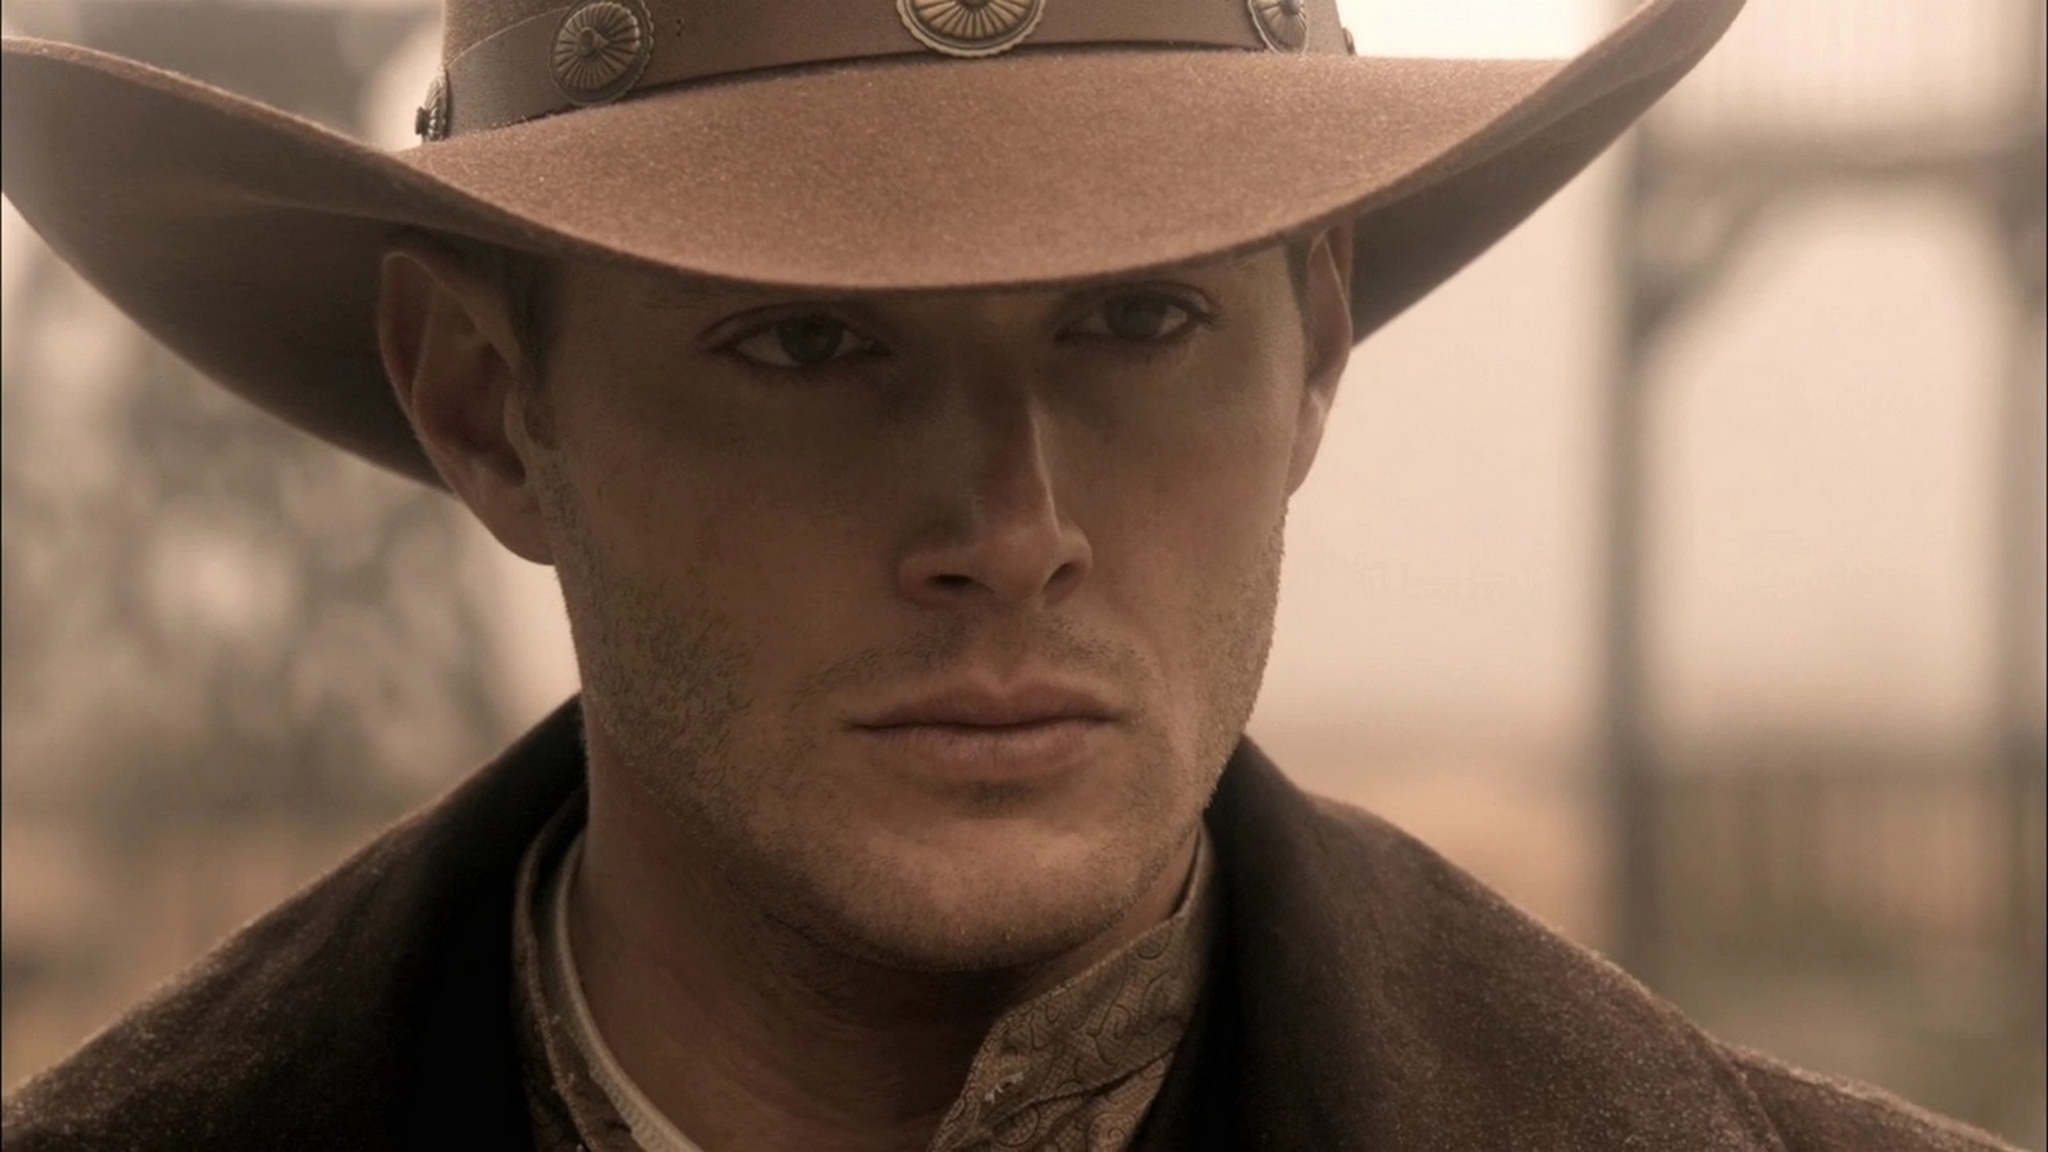  jensen ackles cowboy hat a look wallpapers photos pictures